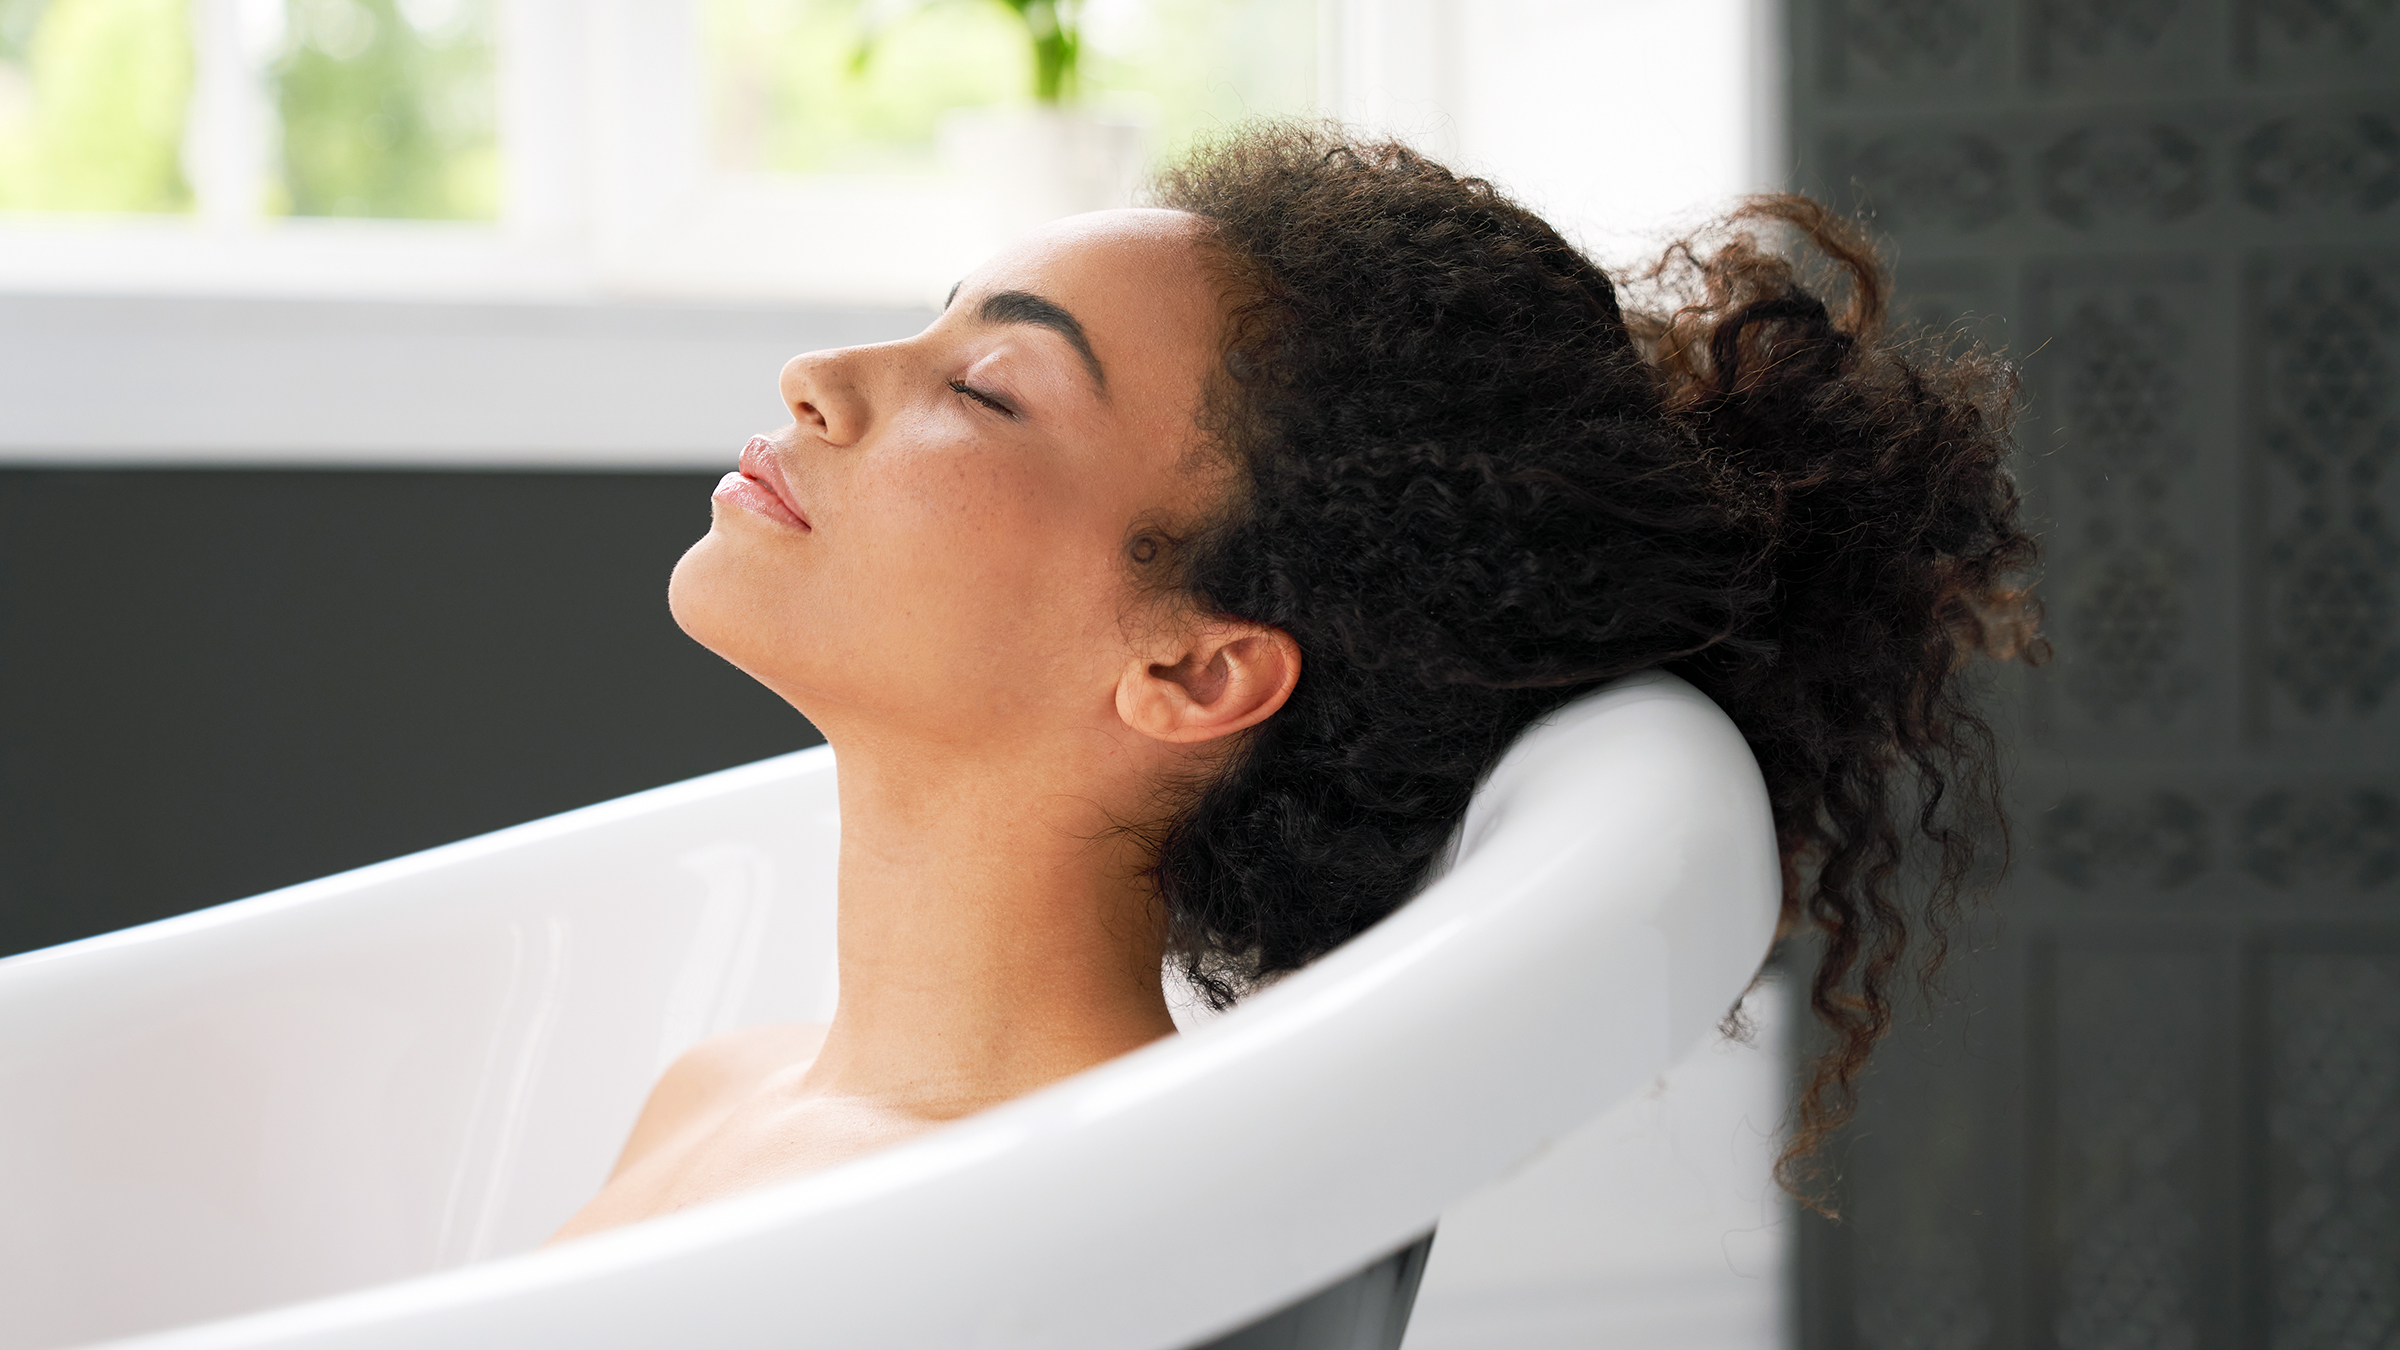 5 Hot Bath Benefits You Need to Know About - GoodRx